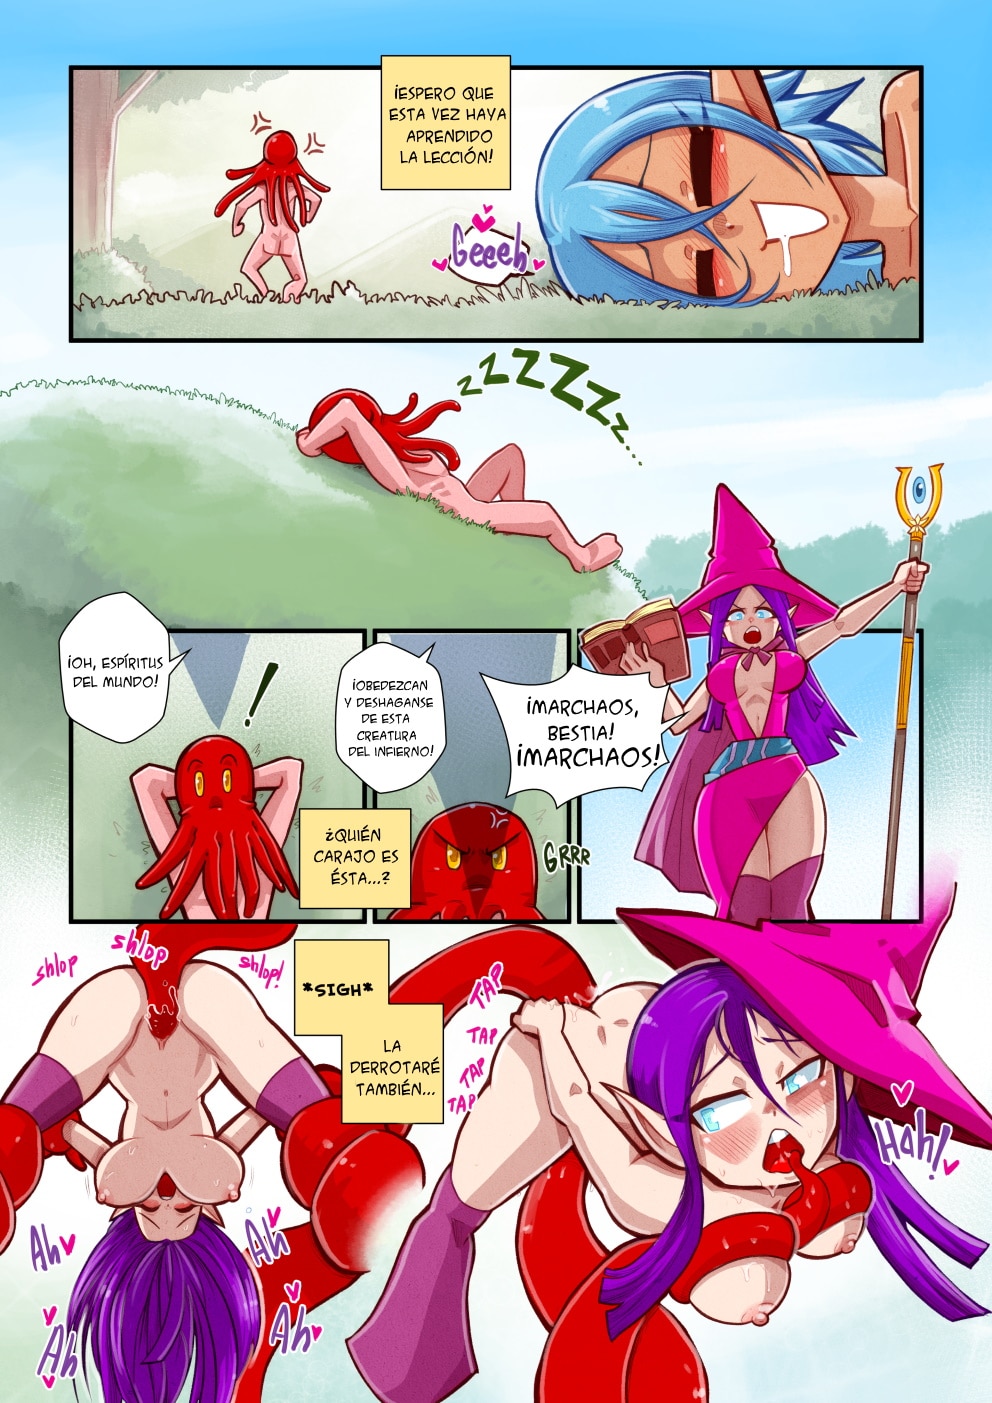 Life As A Tentacle Monster In Another World 09